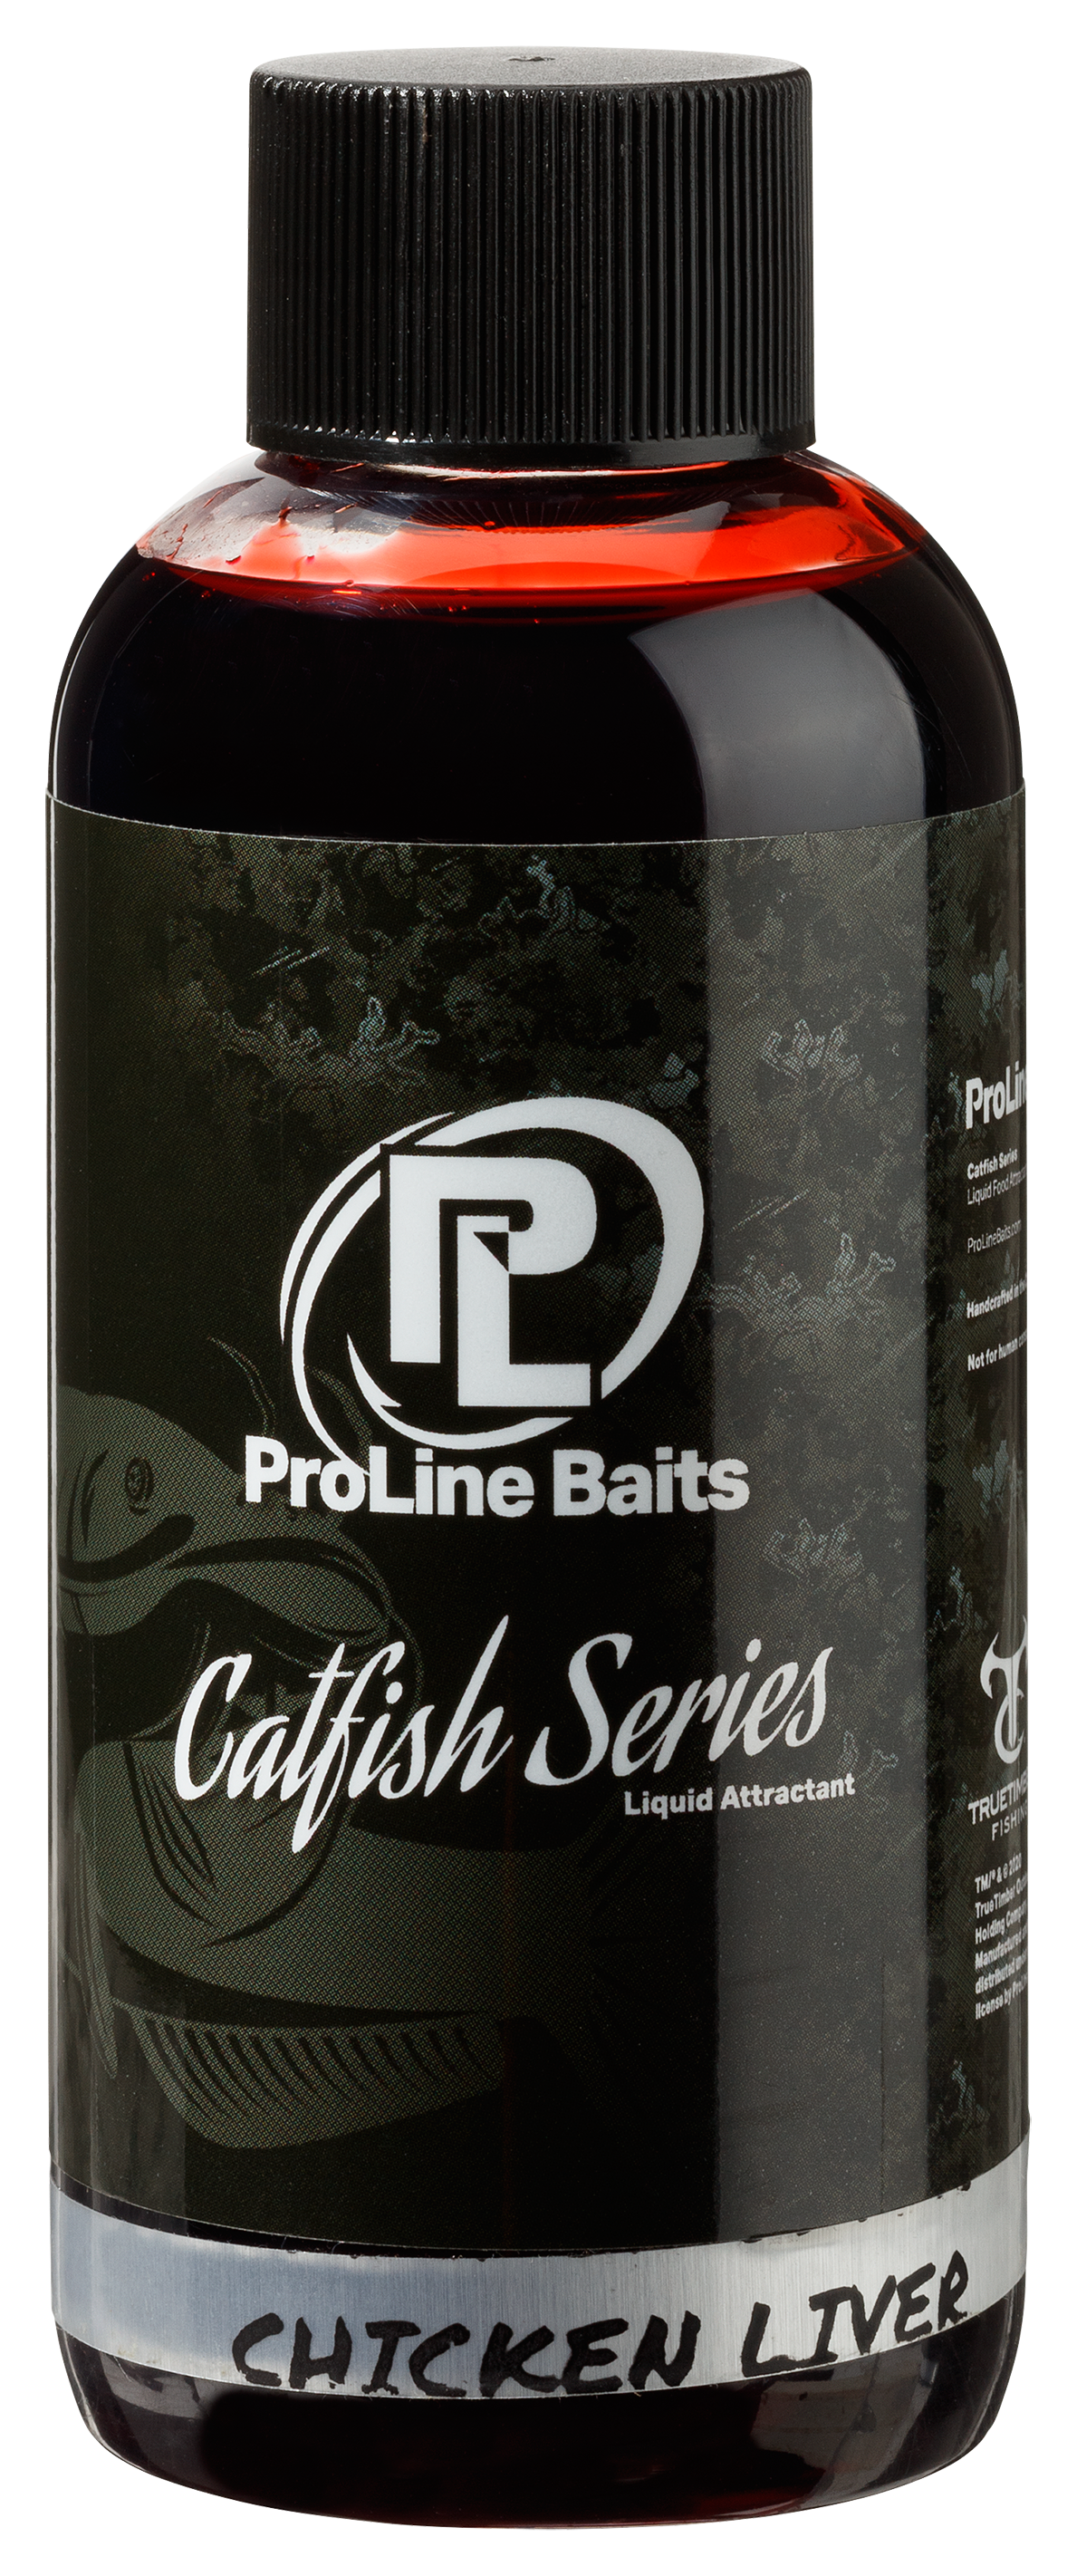 Catfish Series, Check out the New Catfish Series at www.prolinebaits.com